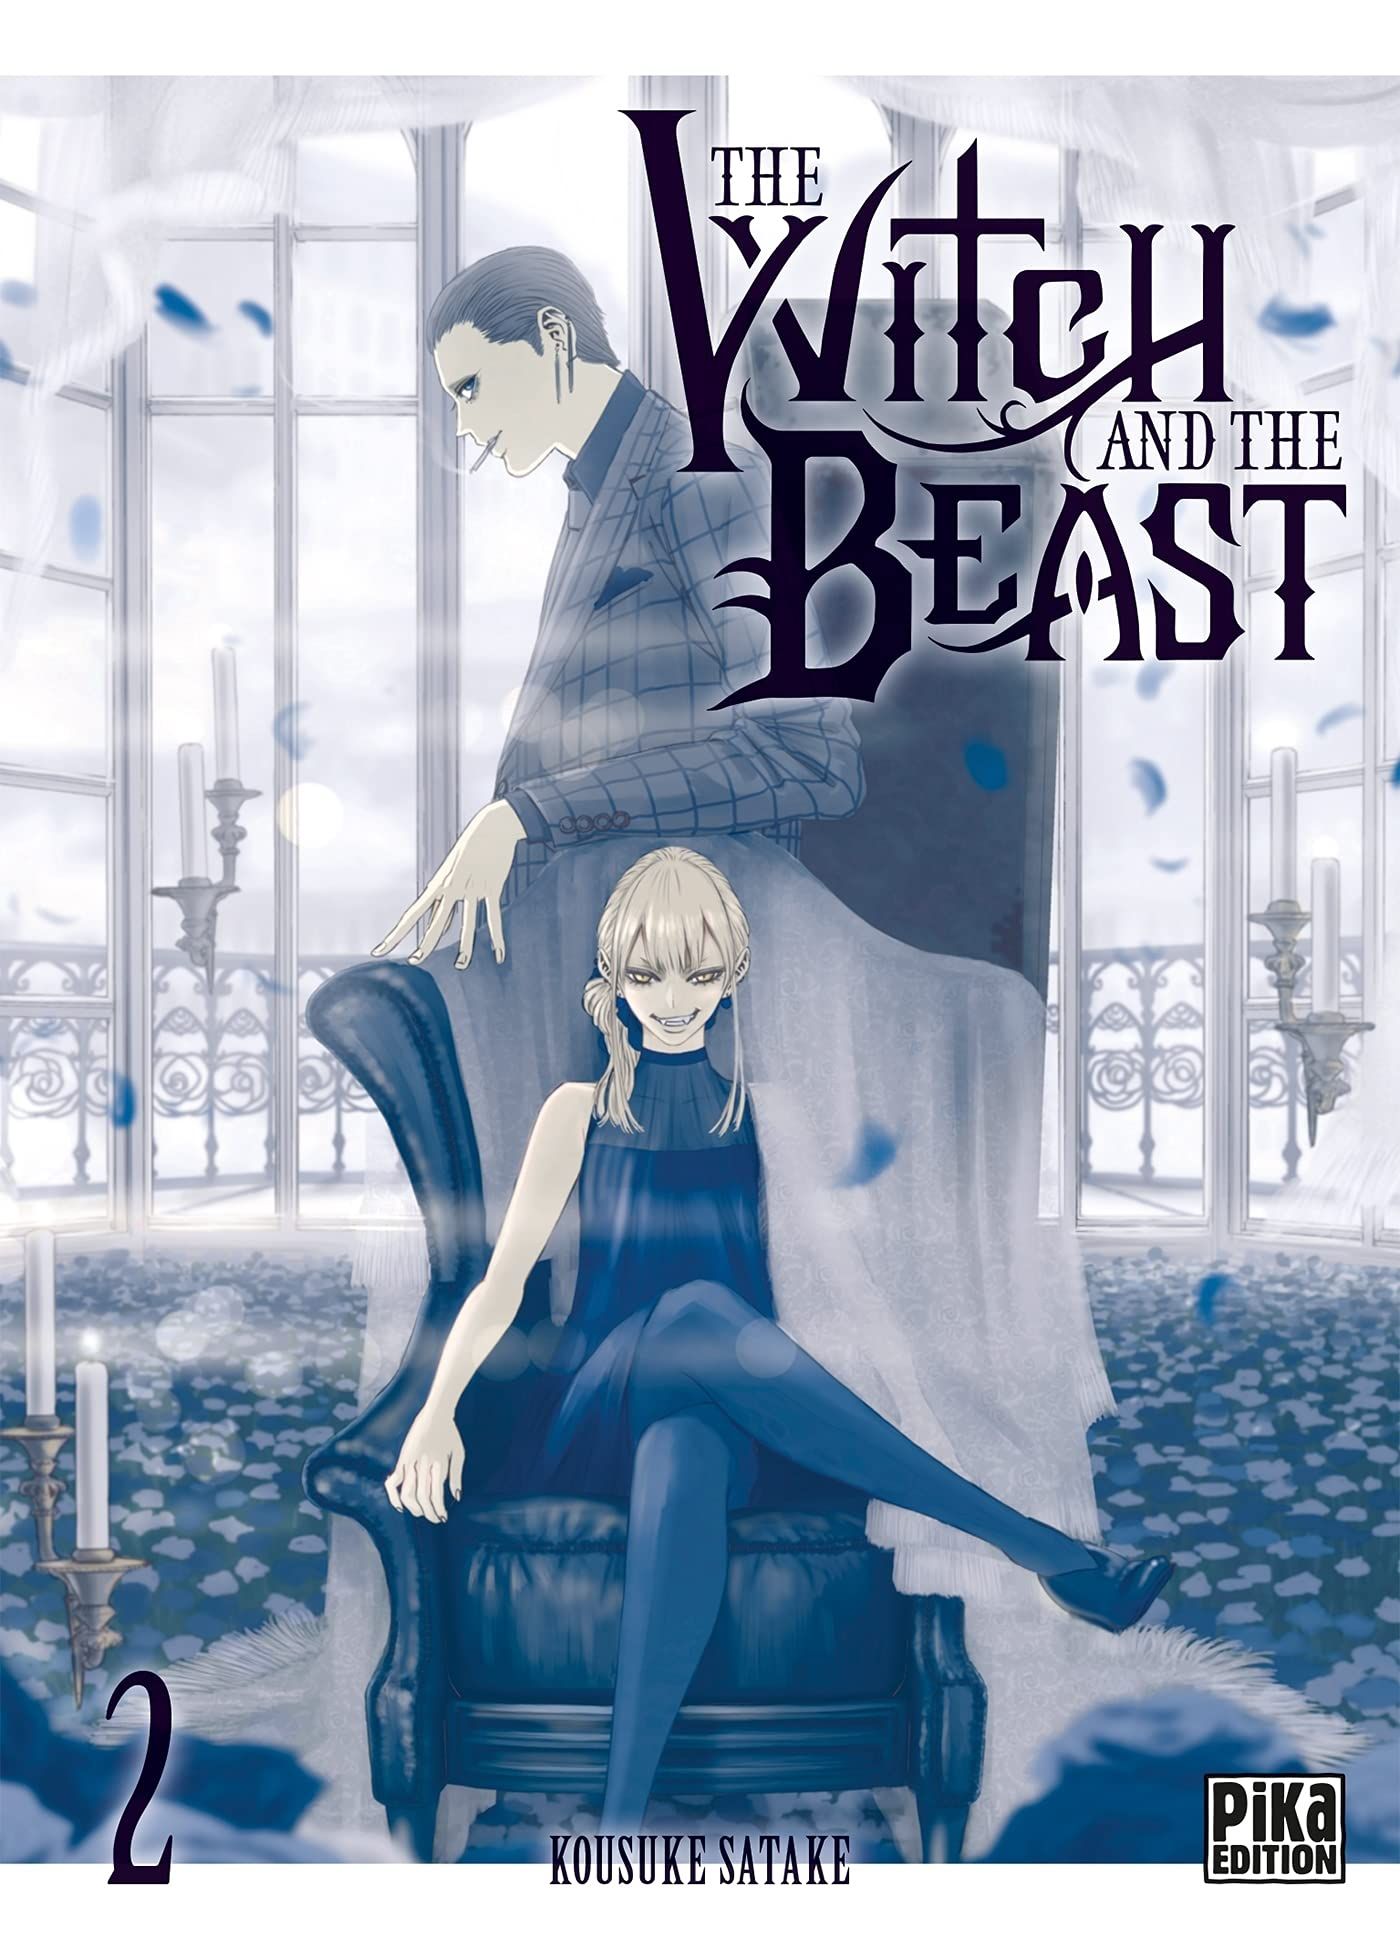 The Witch and the Beast Vol.2